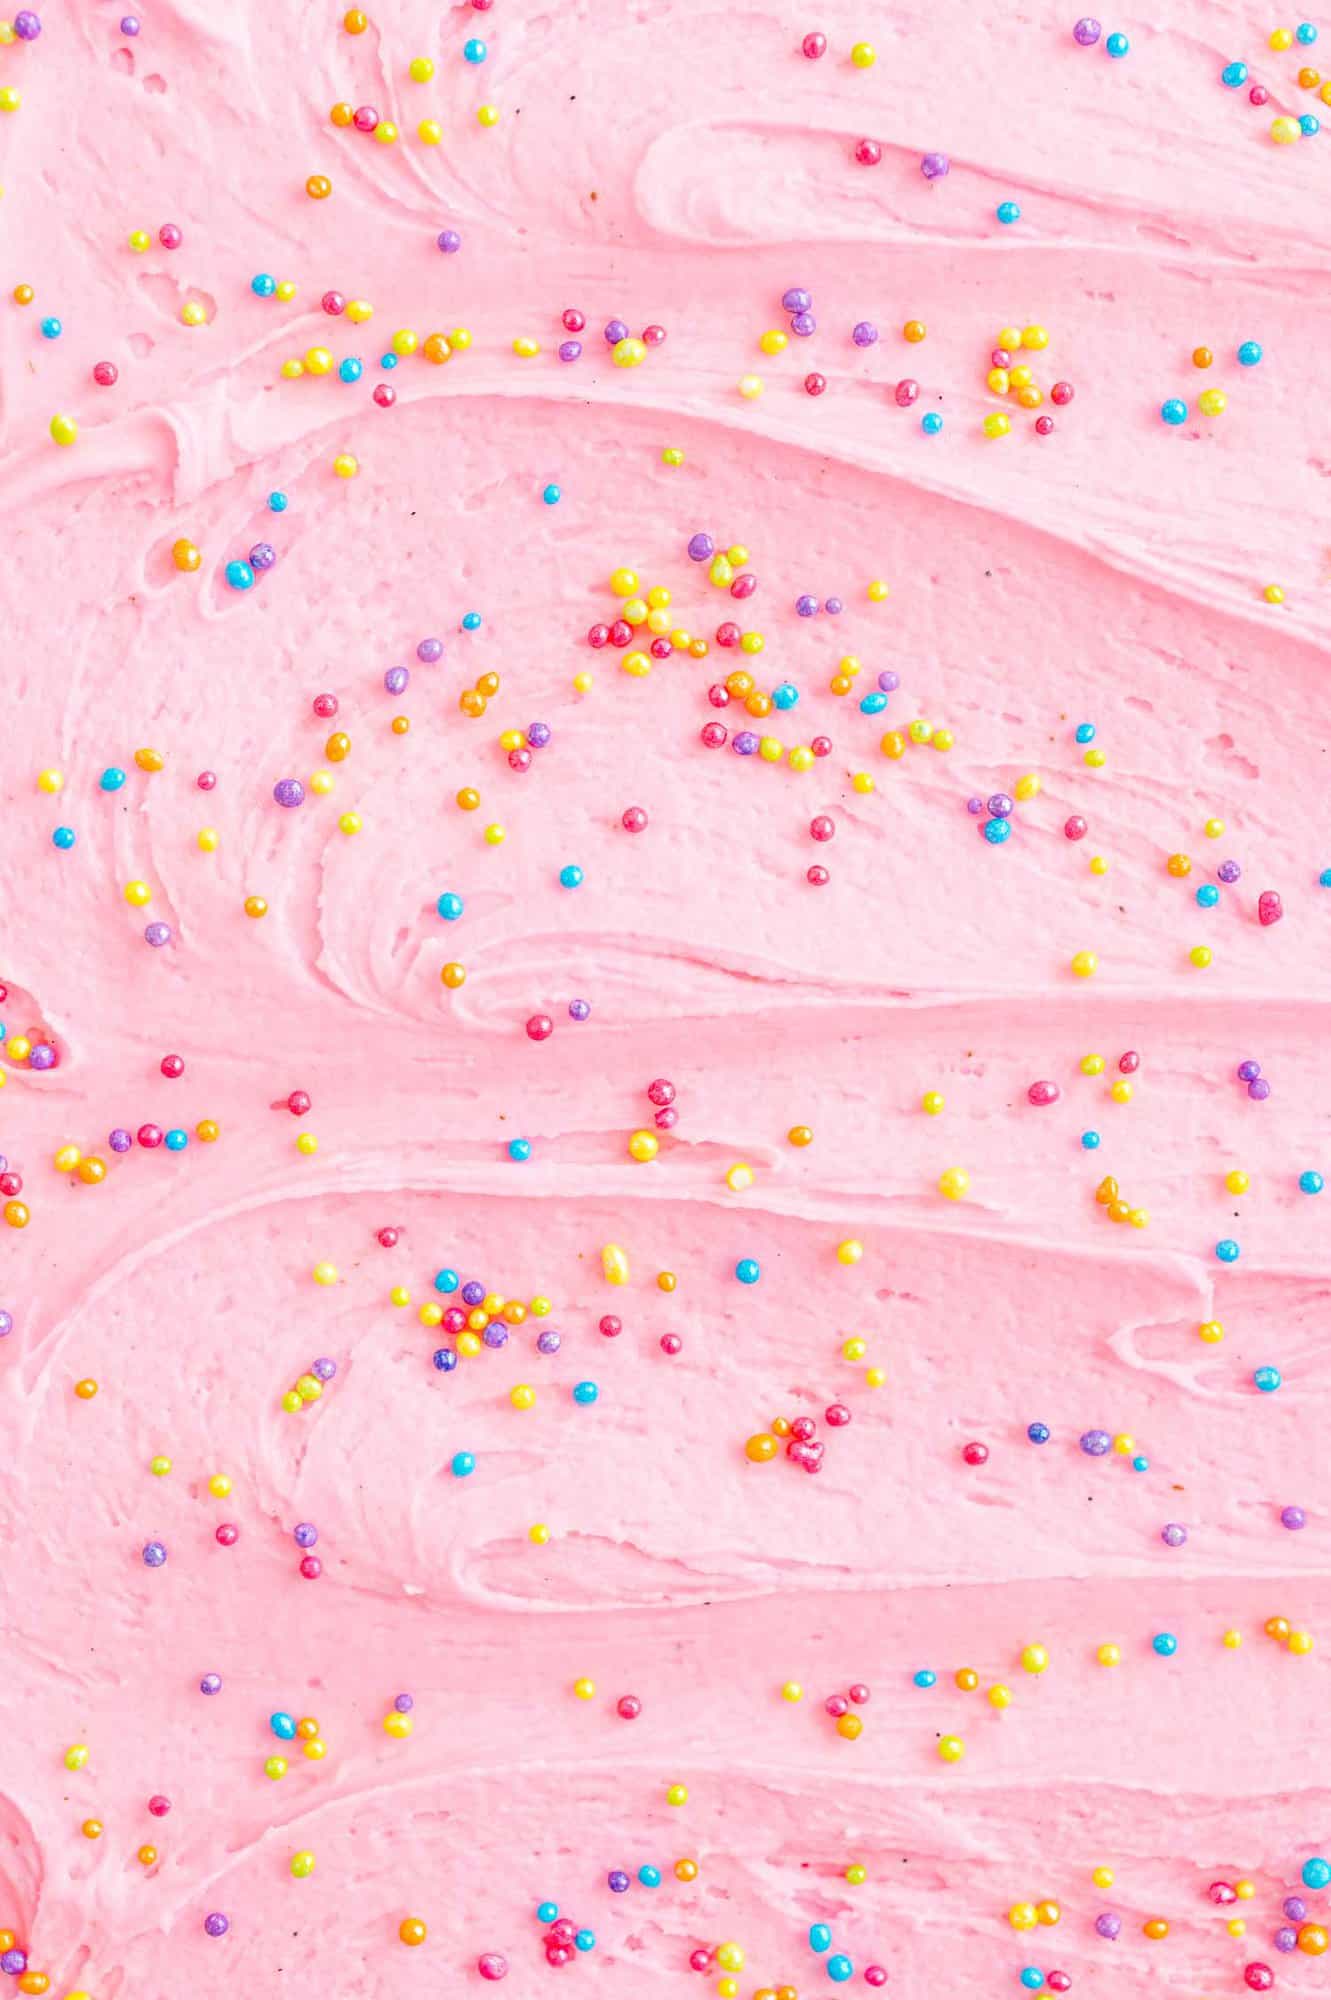 Light pink frosting with multi-colored sprinkles.